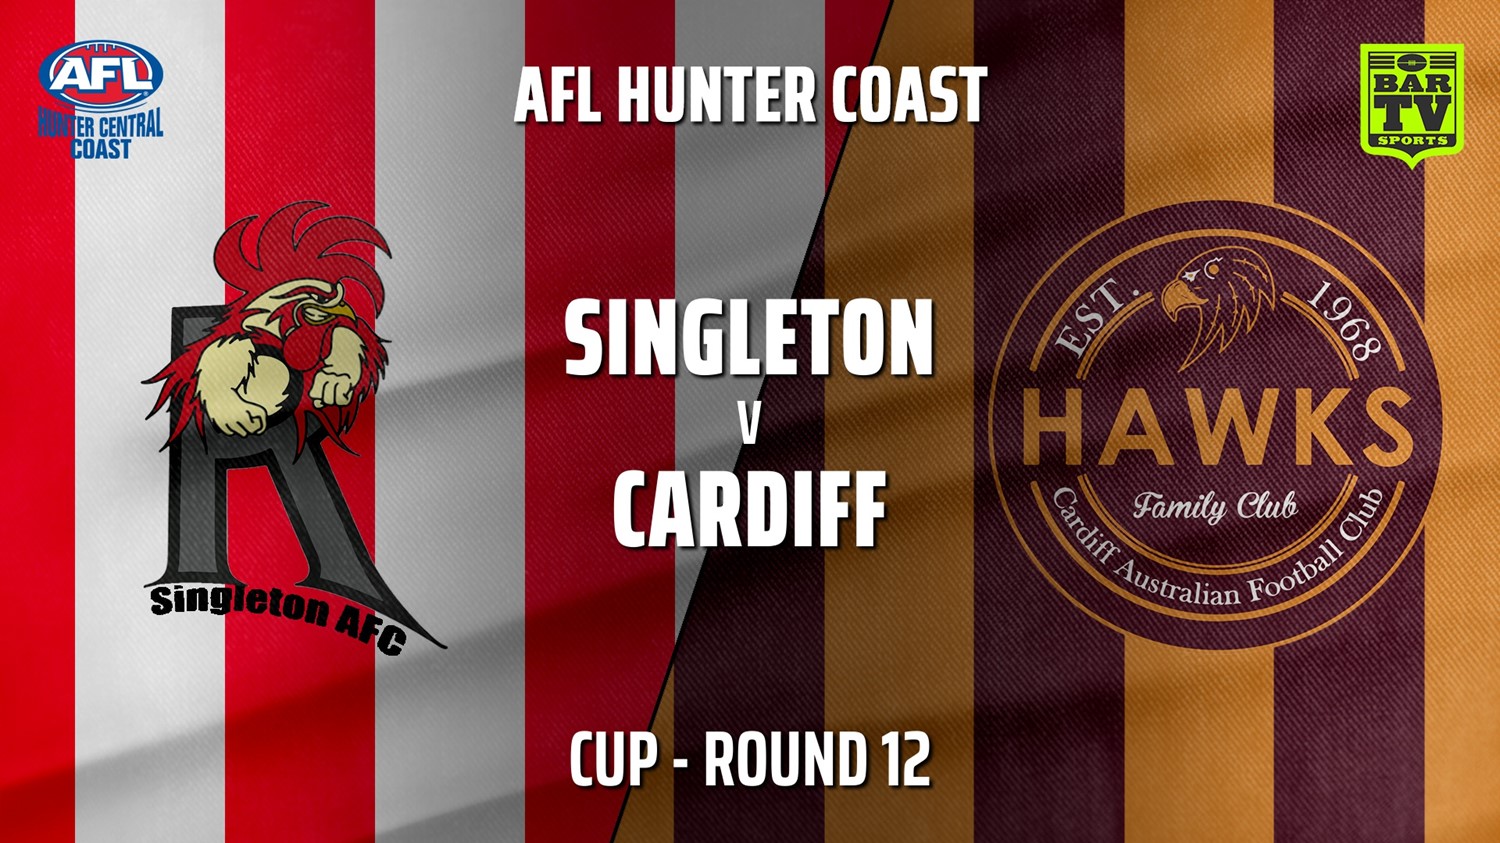 MINI GAME: AFL Hunter Central Coast Round 12 - Cup - Singleton Roosters v Cardiff Hawks Slate Image